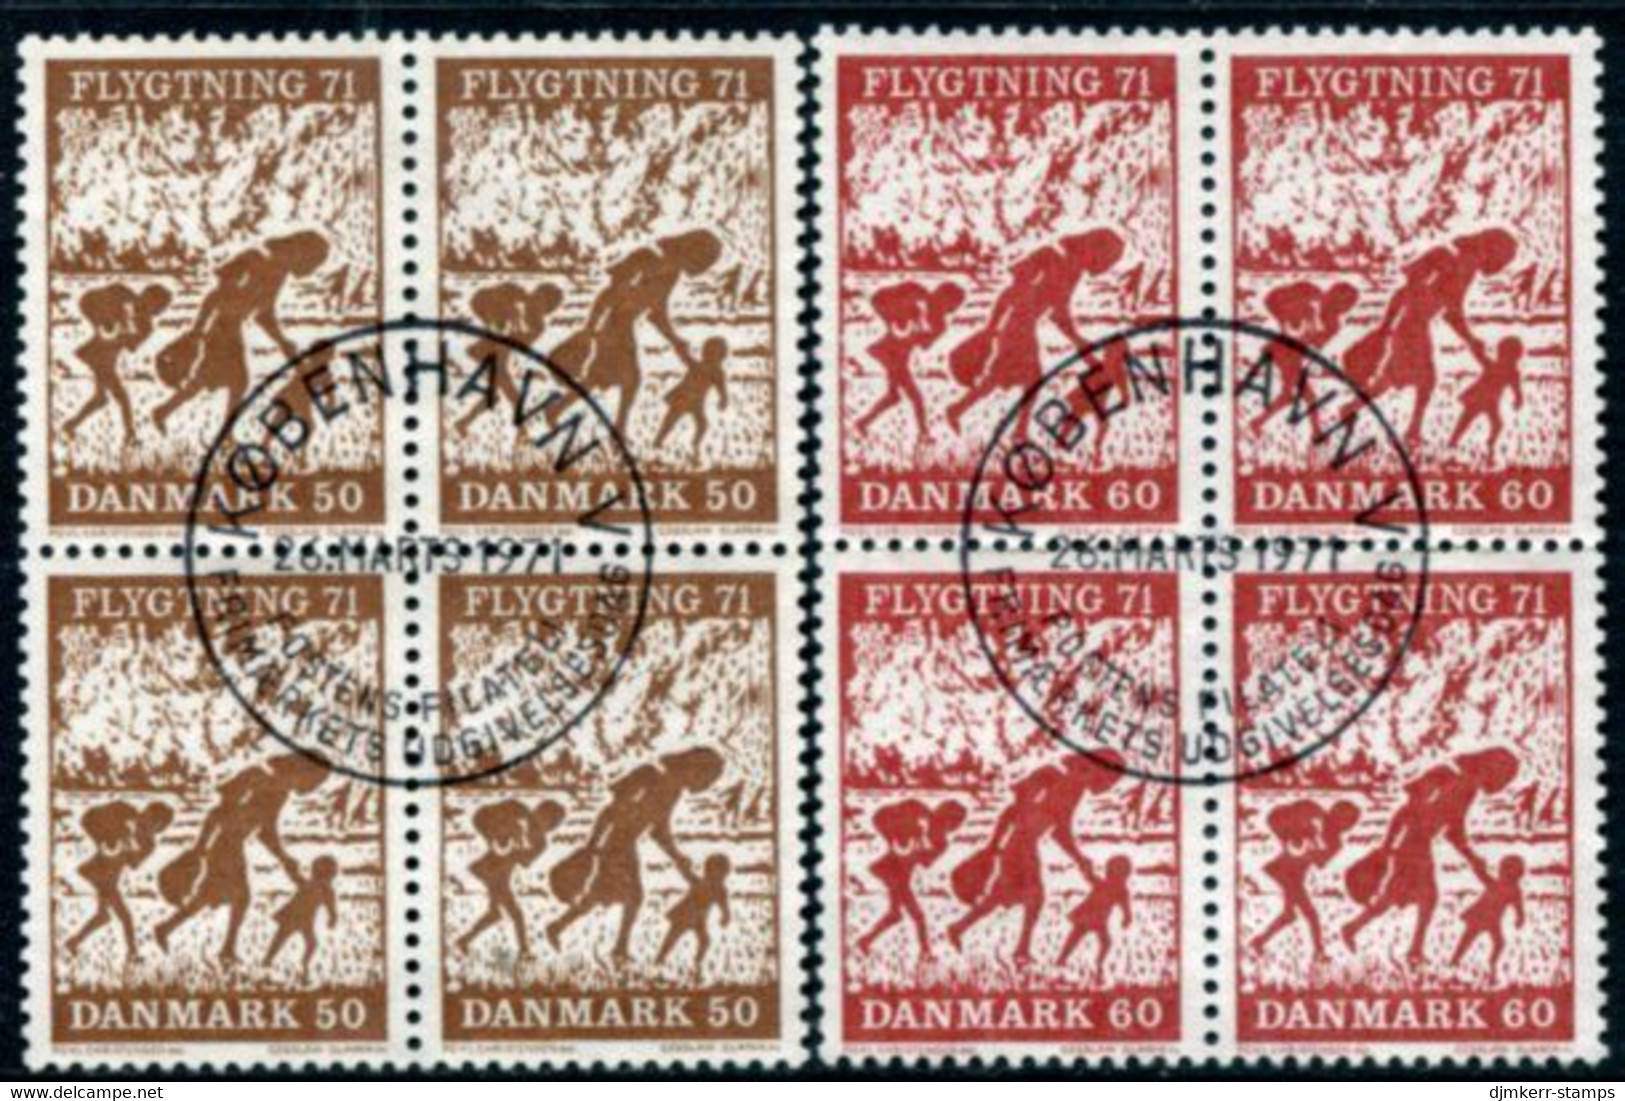 DENMARK 1971 Refugee Aid Blocks Of 4 Used   Michel 508-09 - Used Stamps